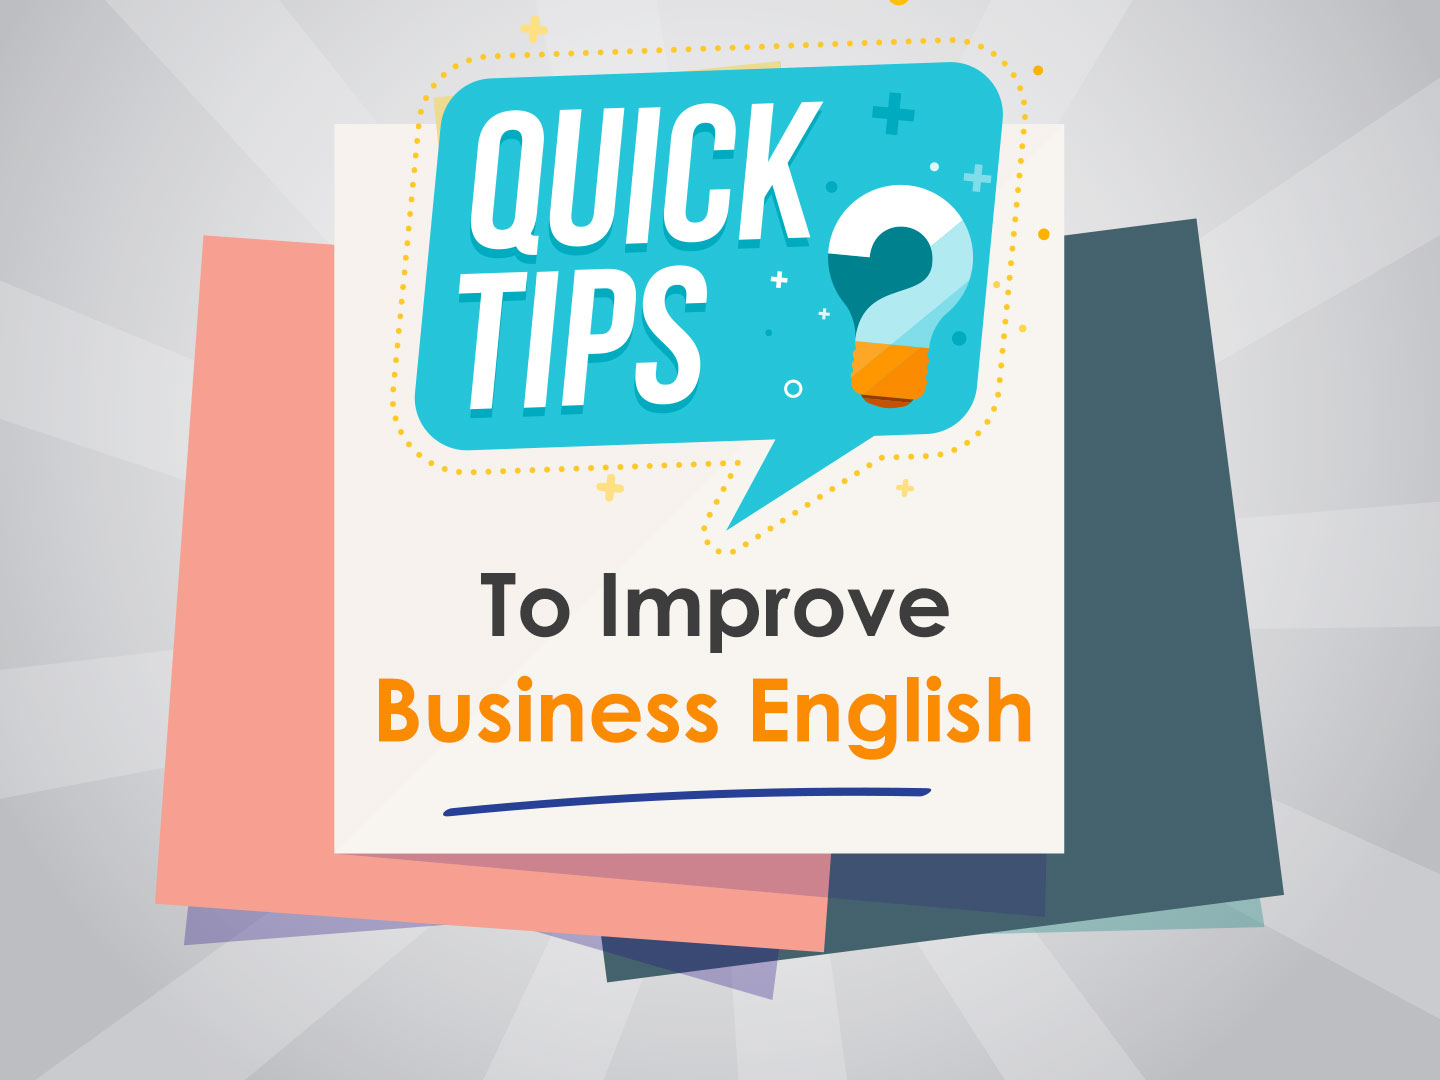 What are the tips to improve Business English?